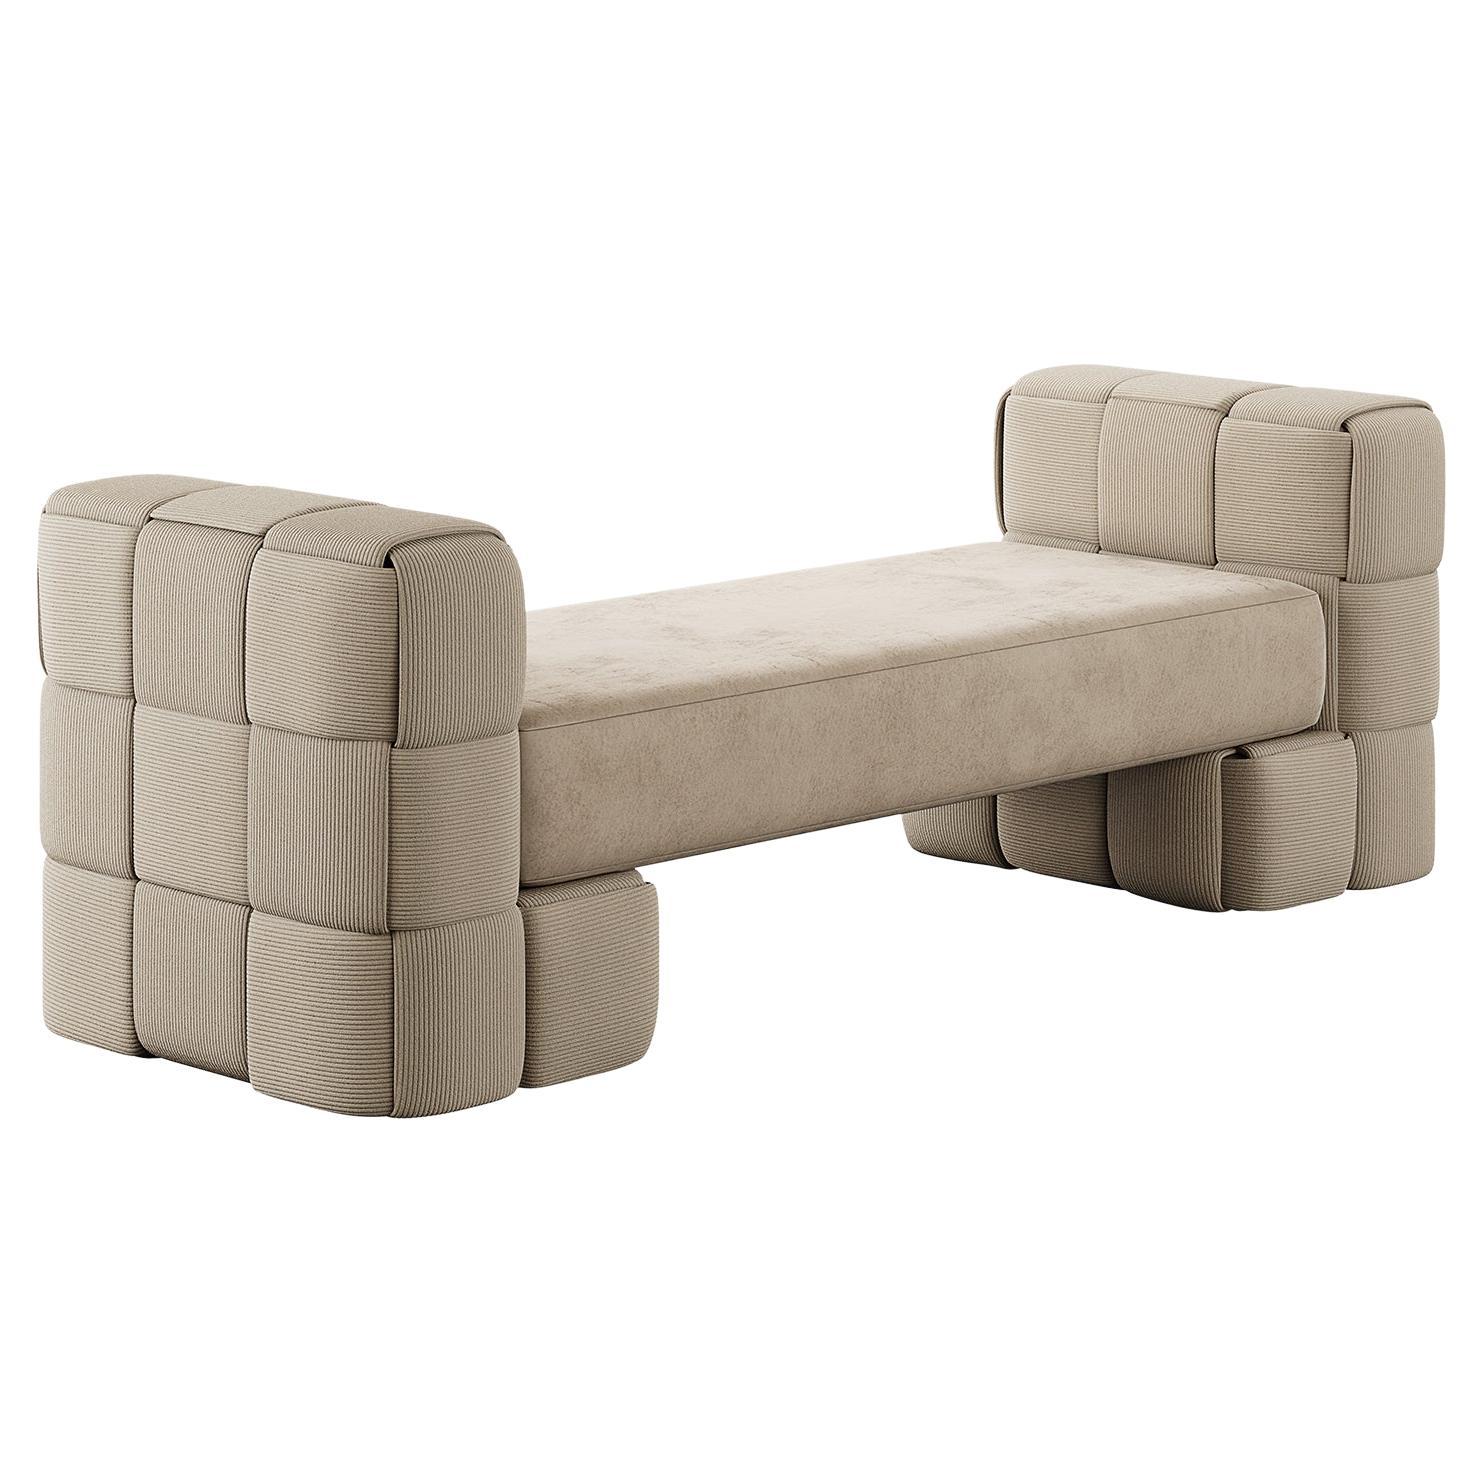 Contemporary Woven Upholstered Bench with Arms Light Brown Beige Corduroy For Sale